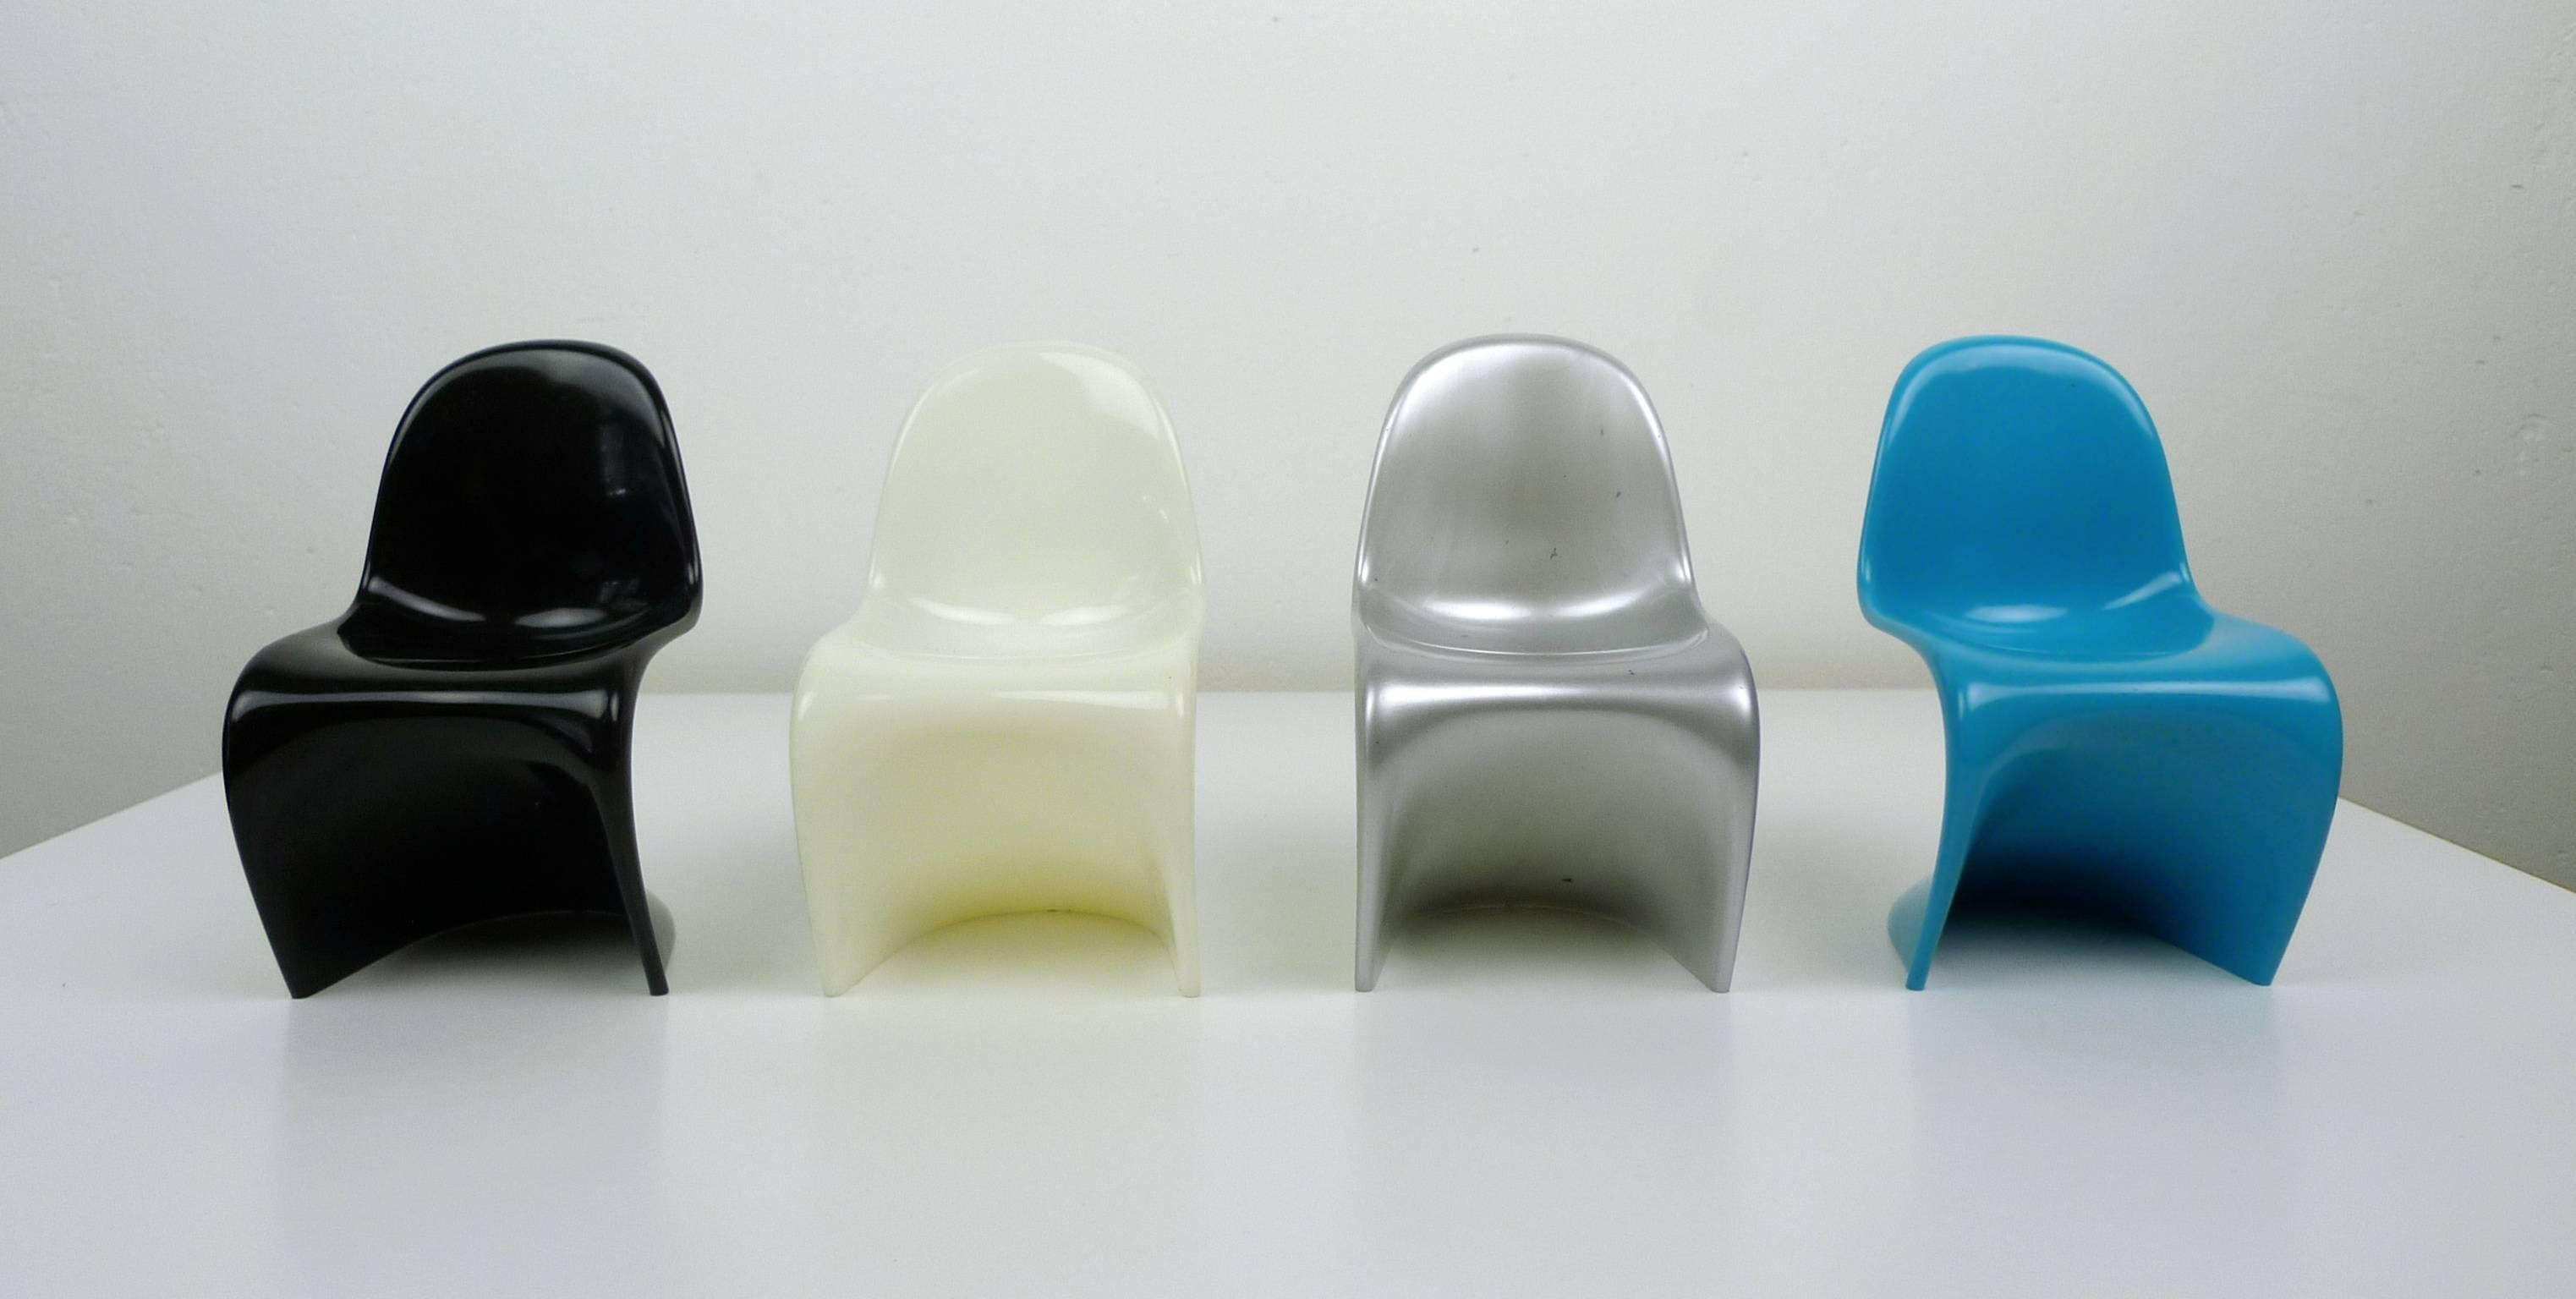 Four miniatures of the Verner Panton chair made of black, white, silver and blue plastics from the 1970s. The scale is 1:6.
They are stackable and in a very good shape.